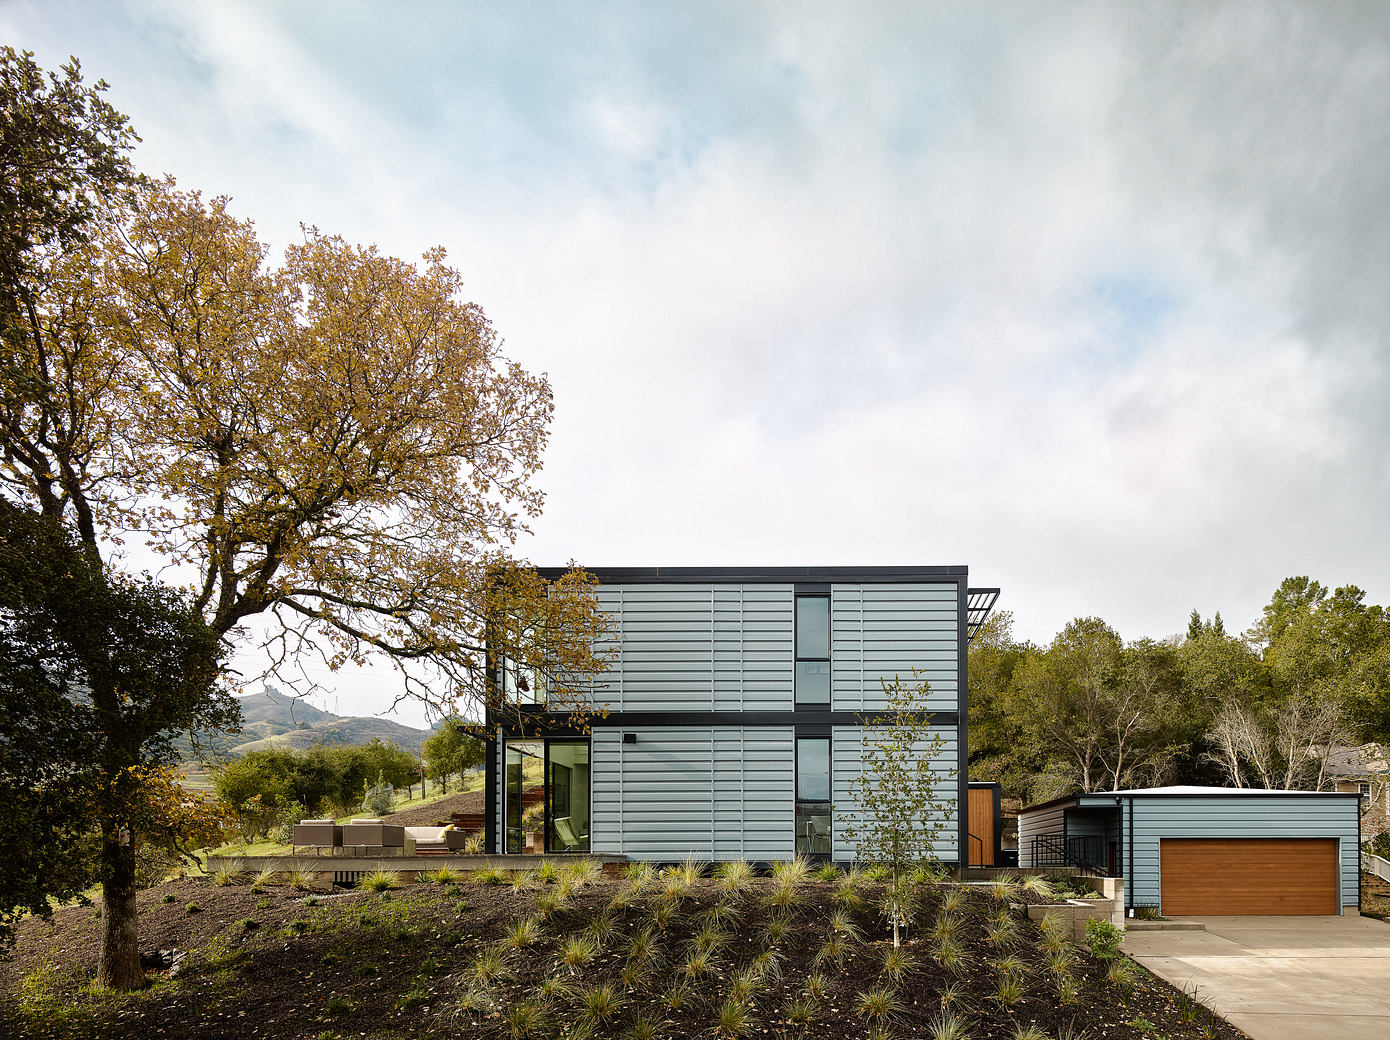 House 006: Sustainable and Modular Architecture in Orinda